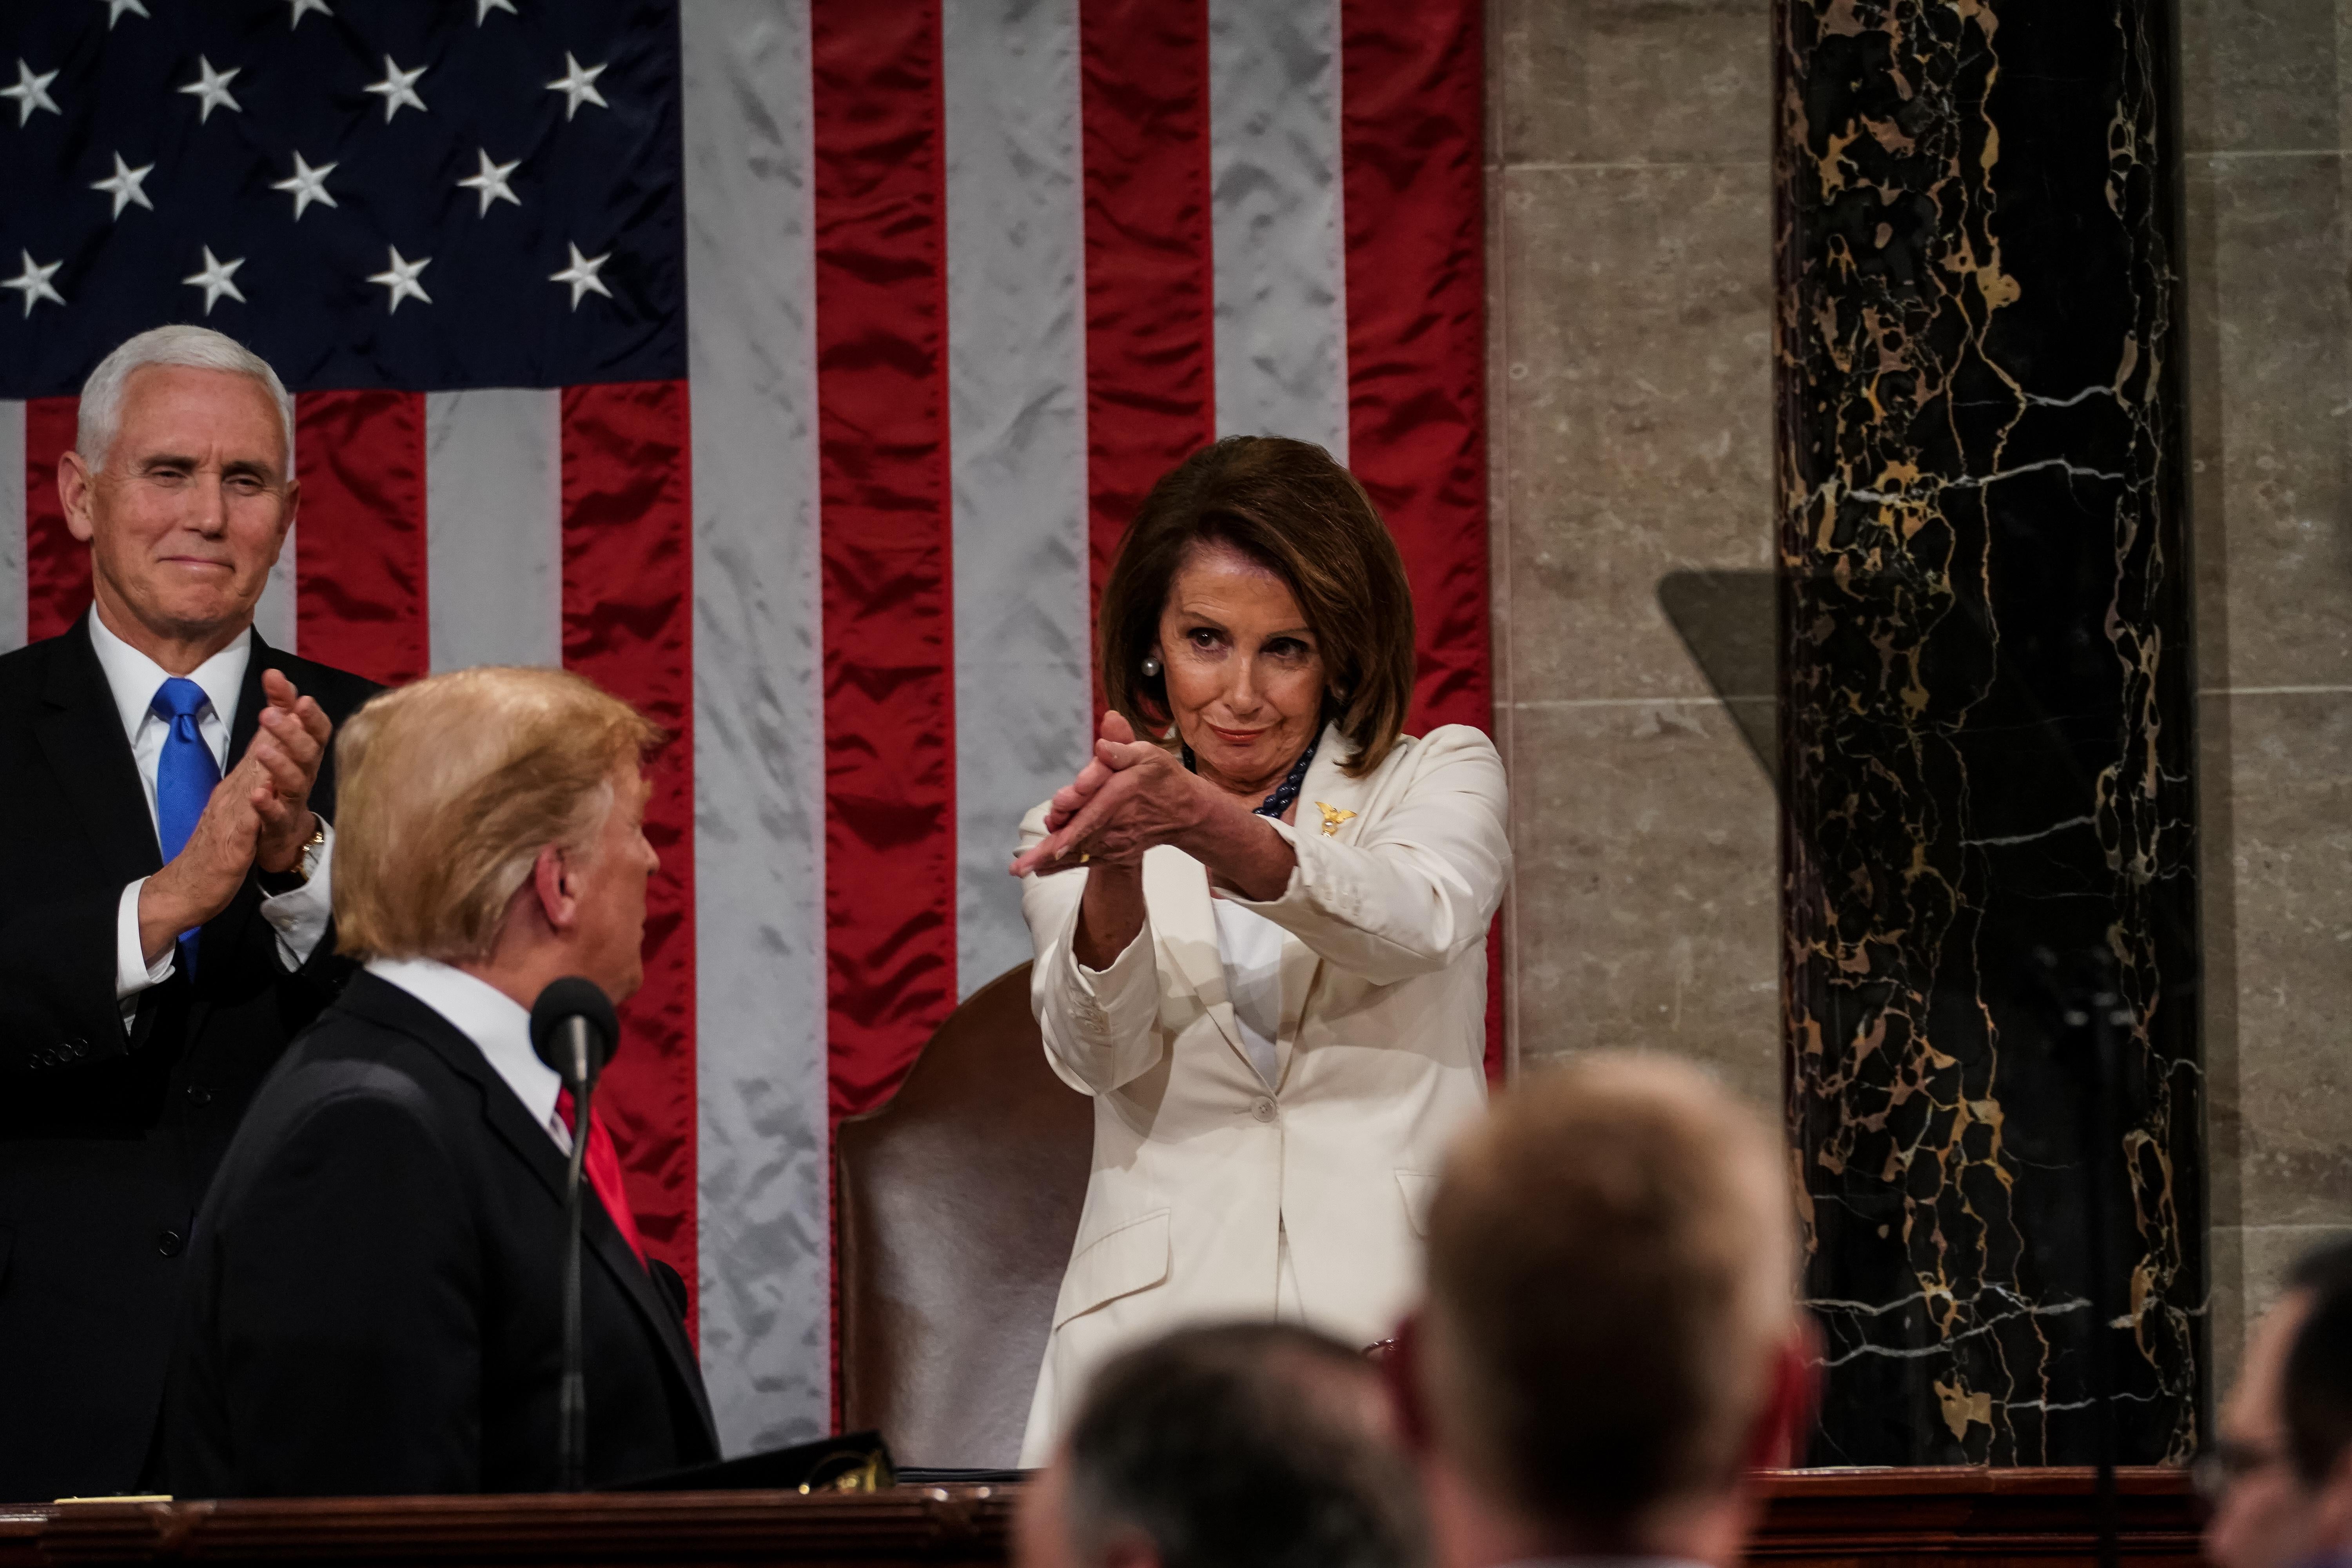 Speaker Nancy Pelosi claps at President Trump during the State of the Union.